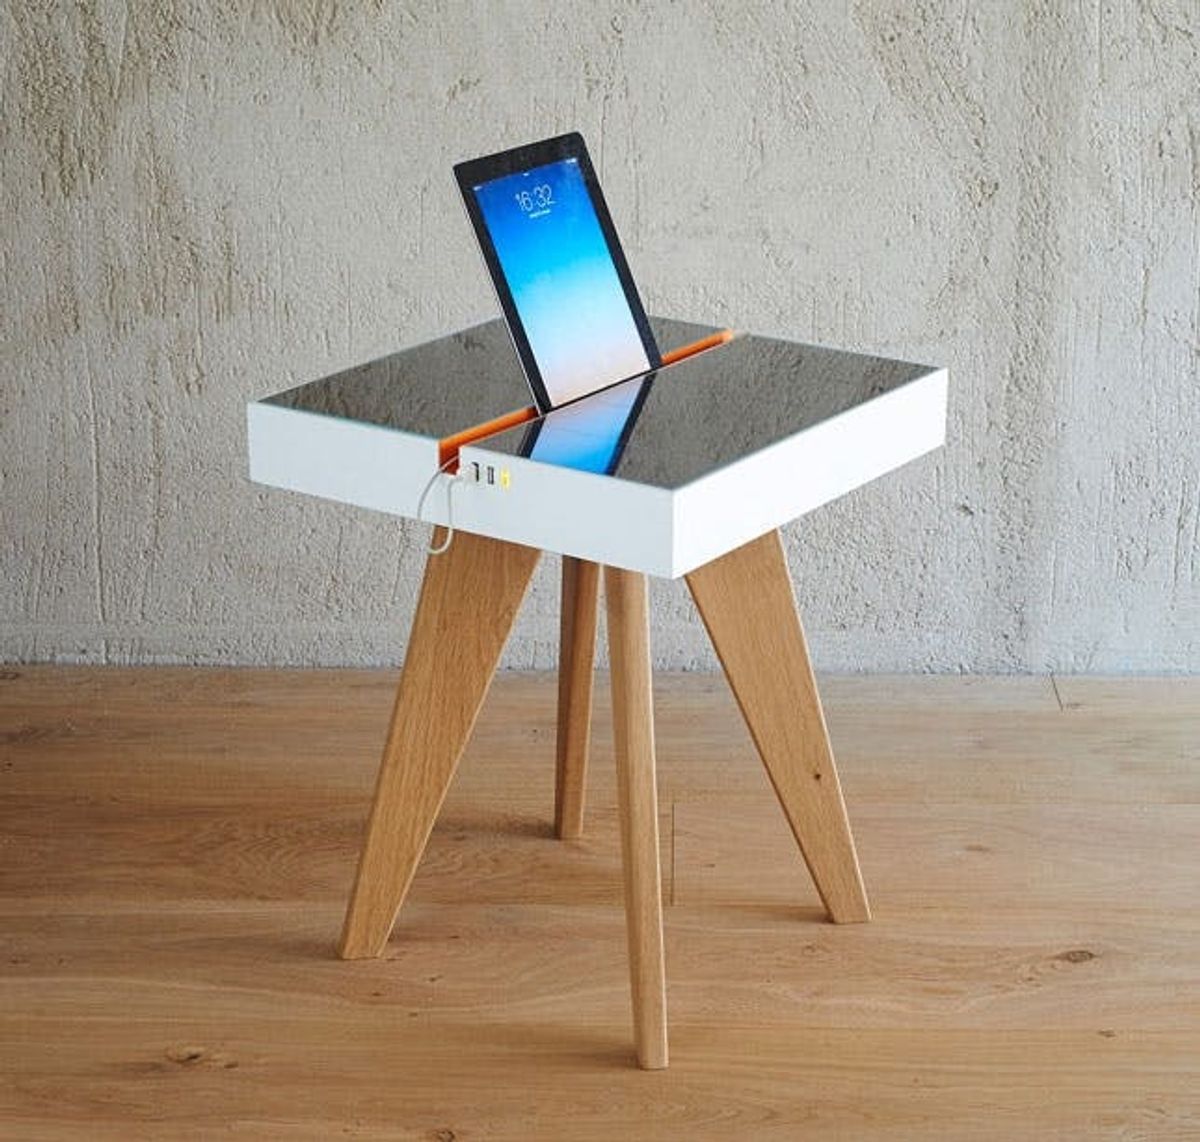 You Can Charge This Device-Charging Table with Sunlight AND Artificial Light